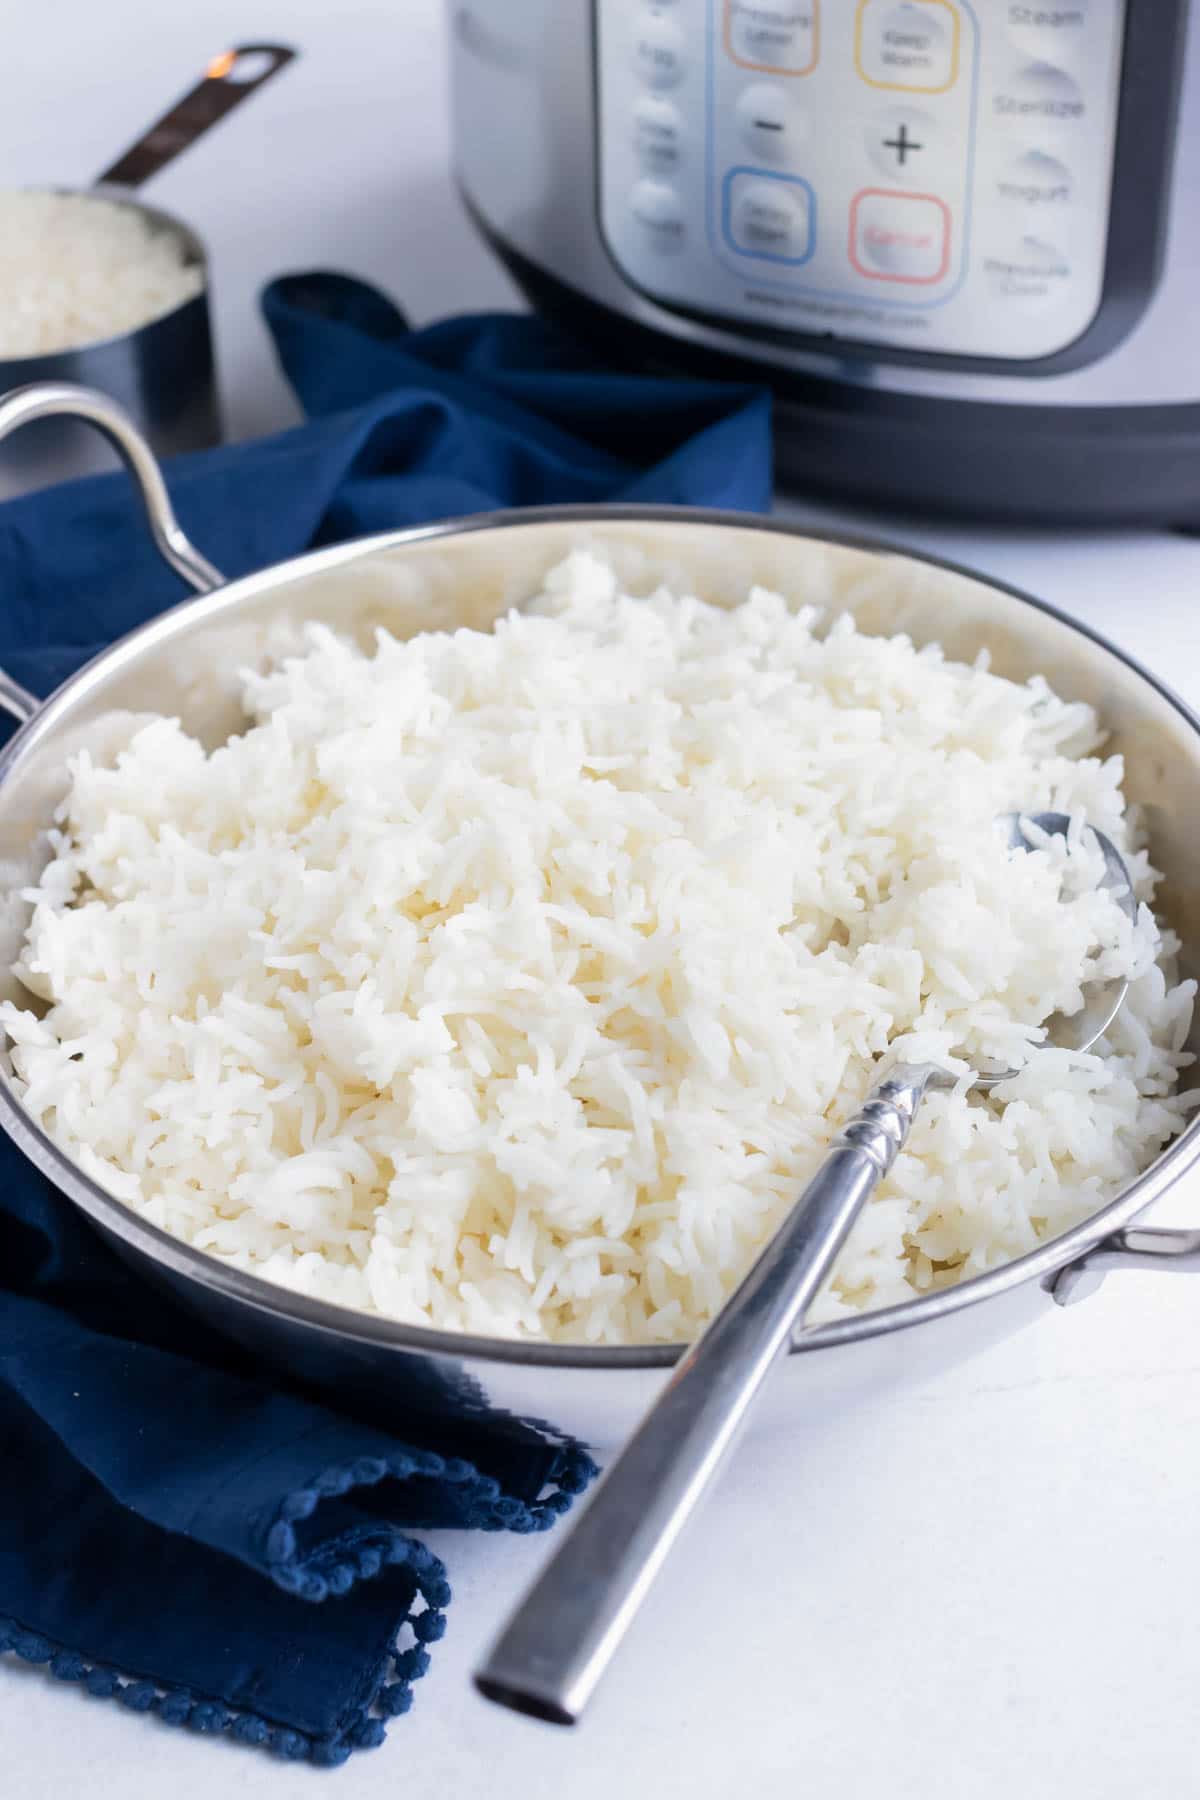 An Indian silver metal serving bowl full of basmati rice with an Instant Pot.